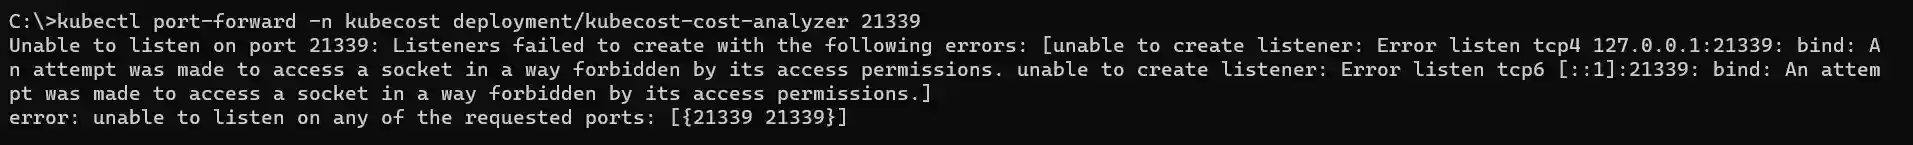 Screenshot of the error message being displayed during kubectl port-forward command targeting a reserved port